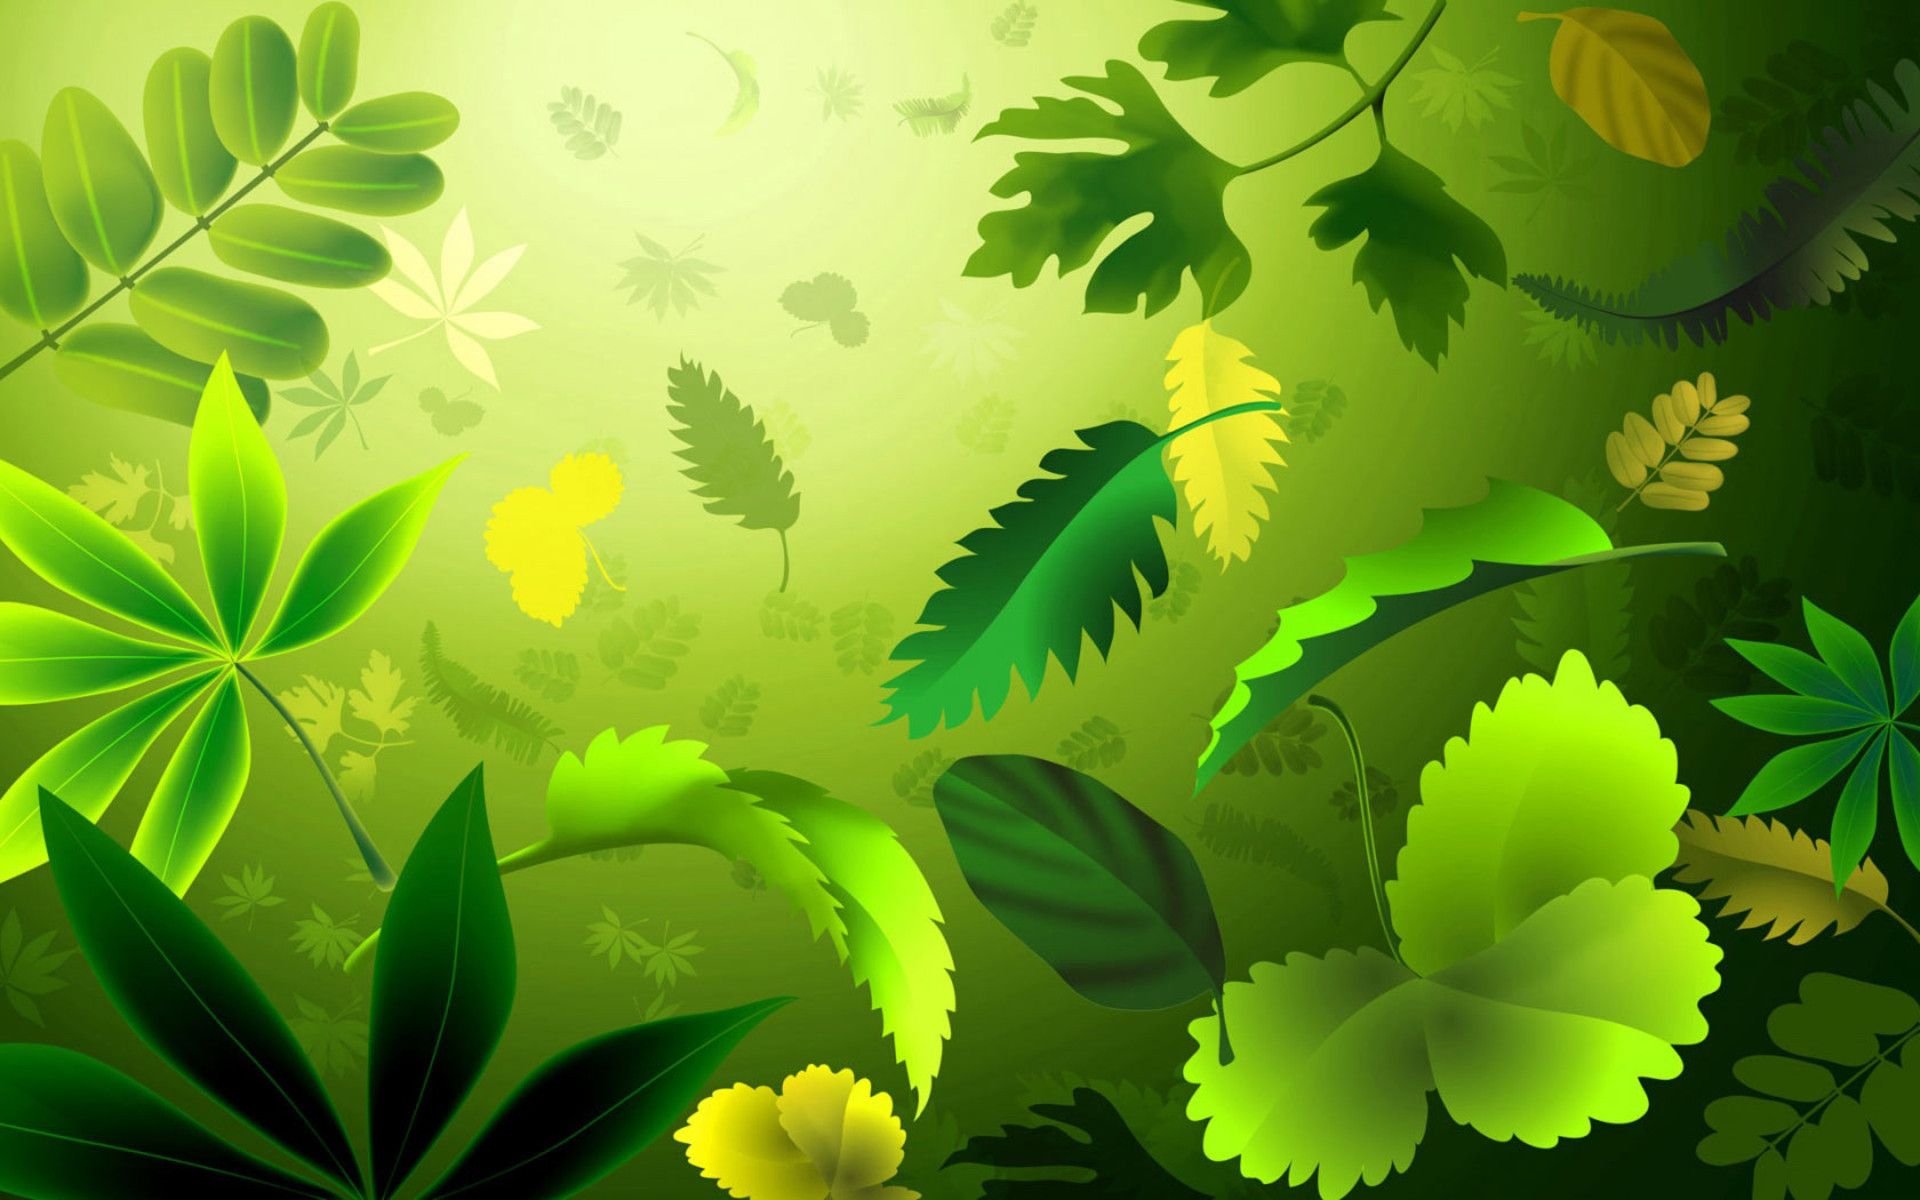 Backgrounds Clipart - Wallpaper Cave